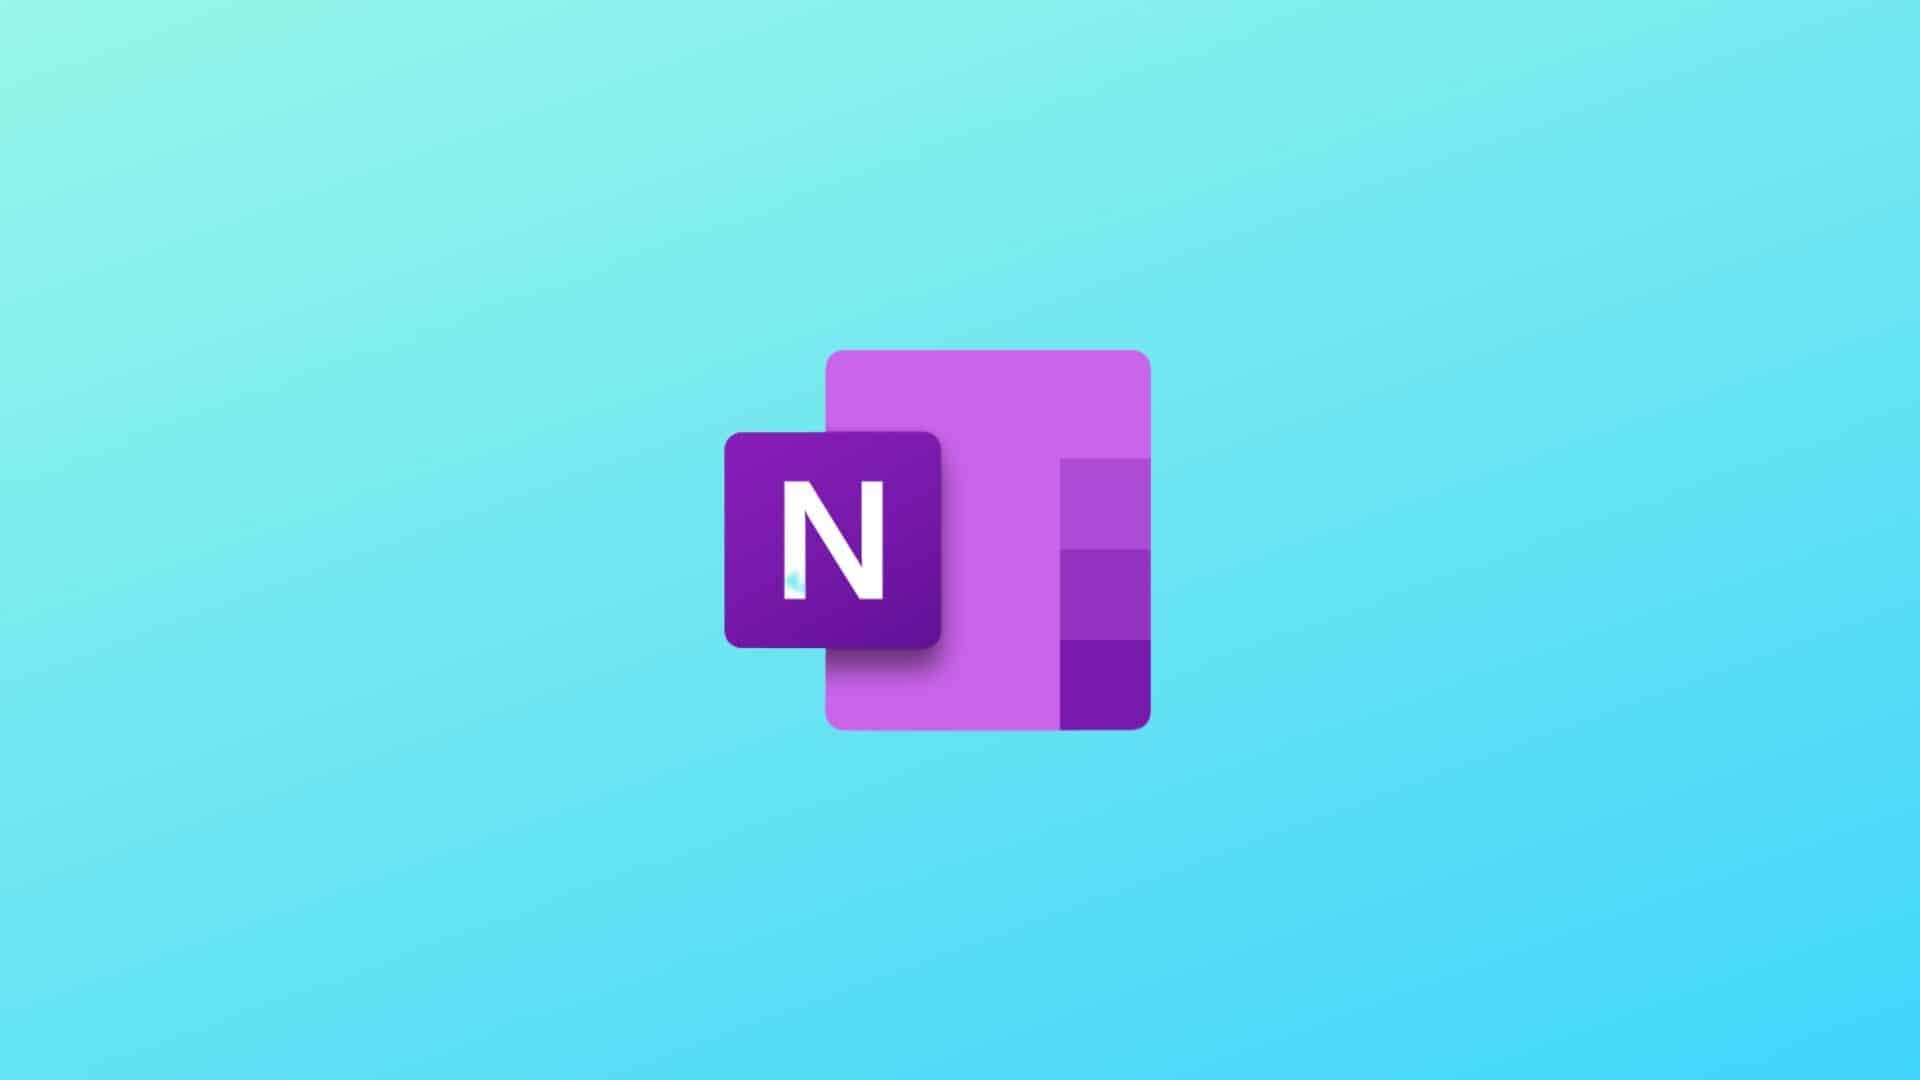 OneNote for Windows is getting new features and AI Copilot is coming in November